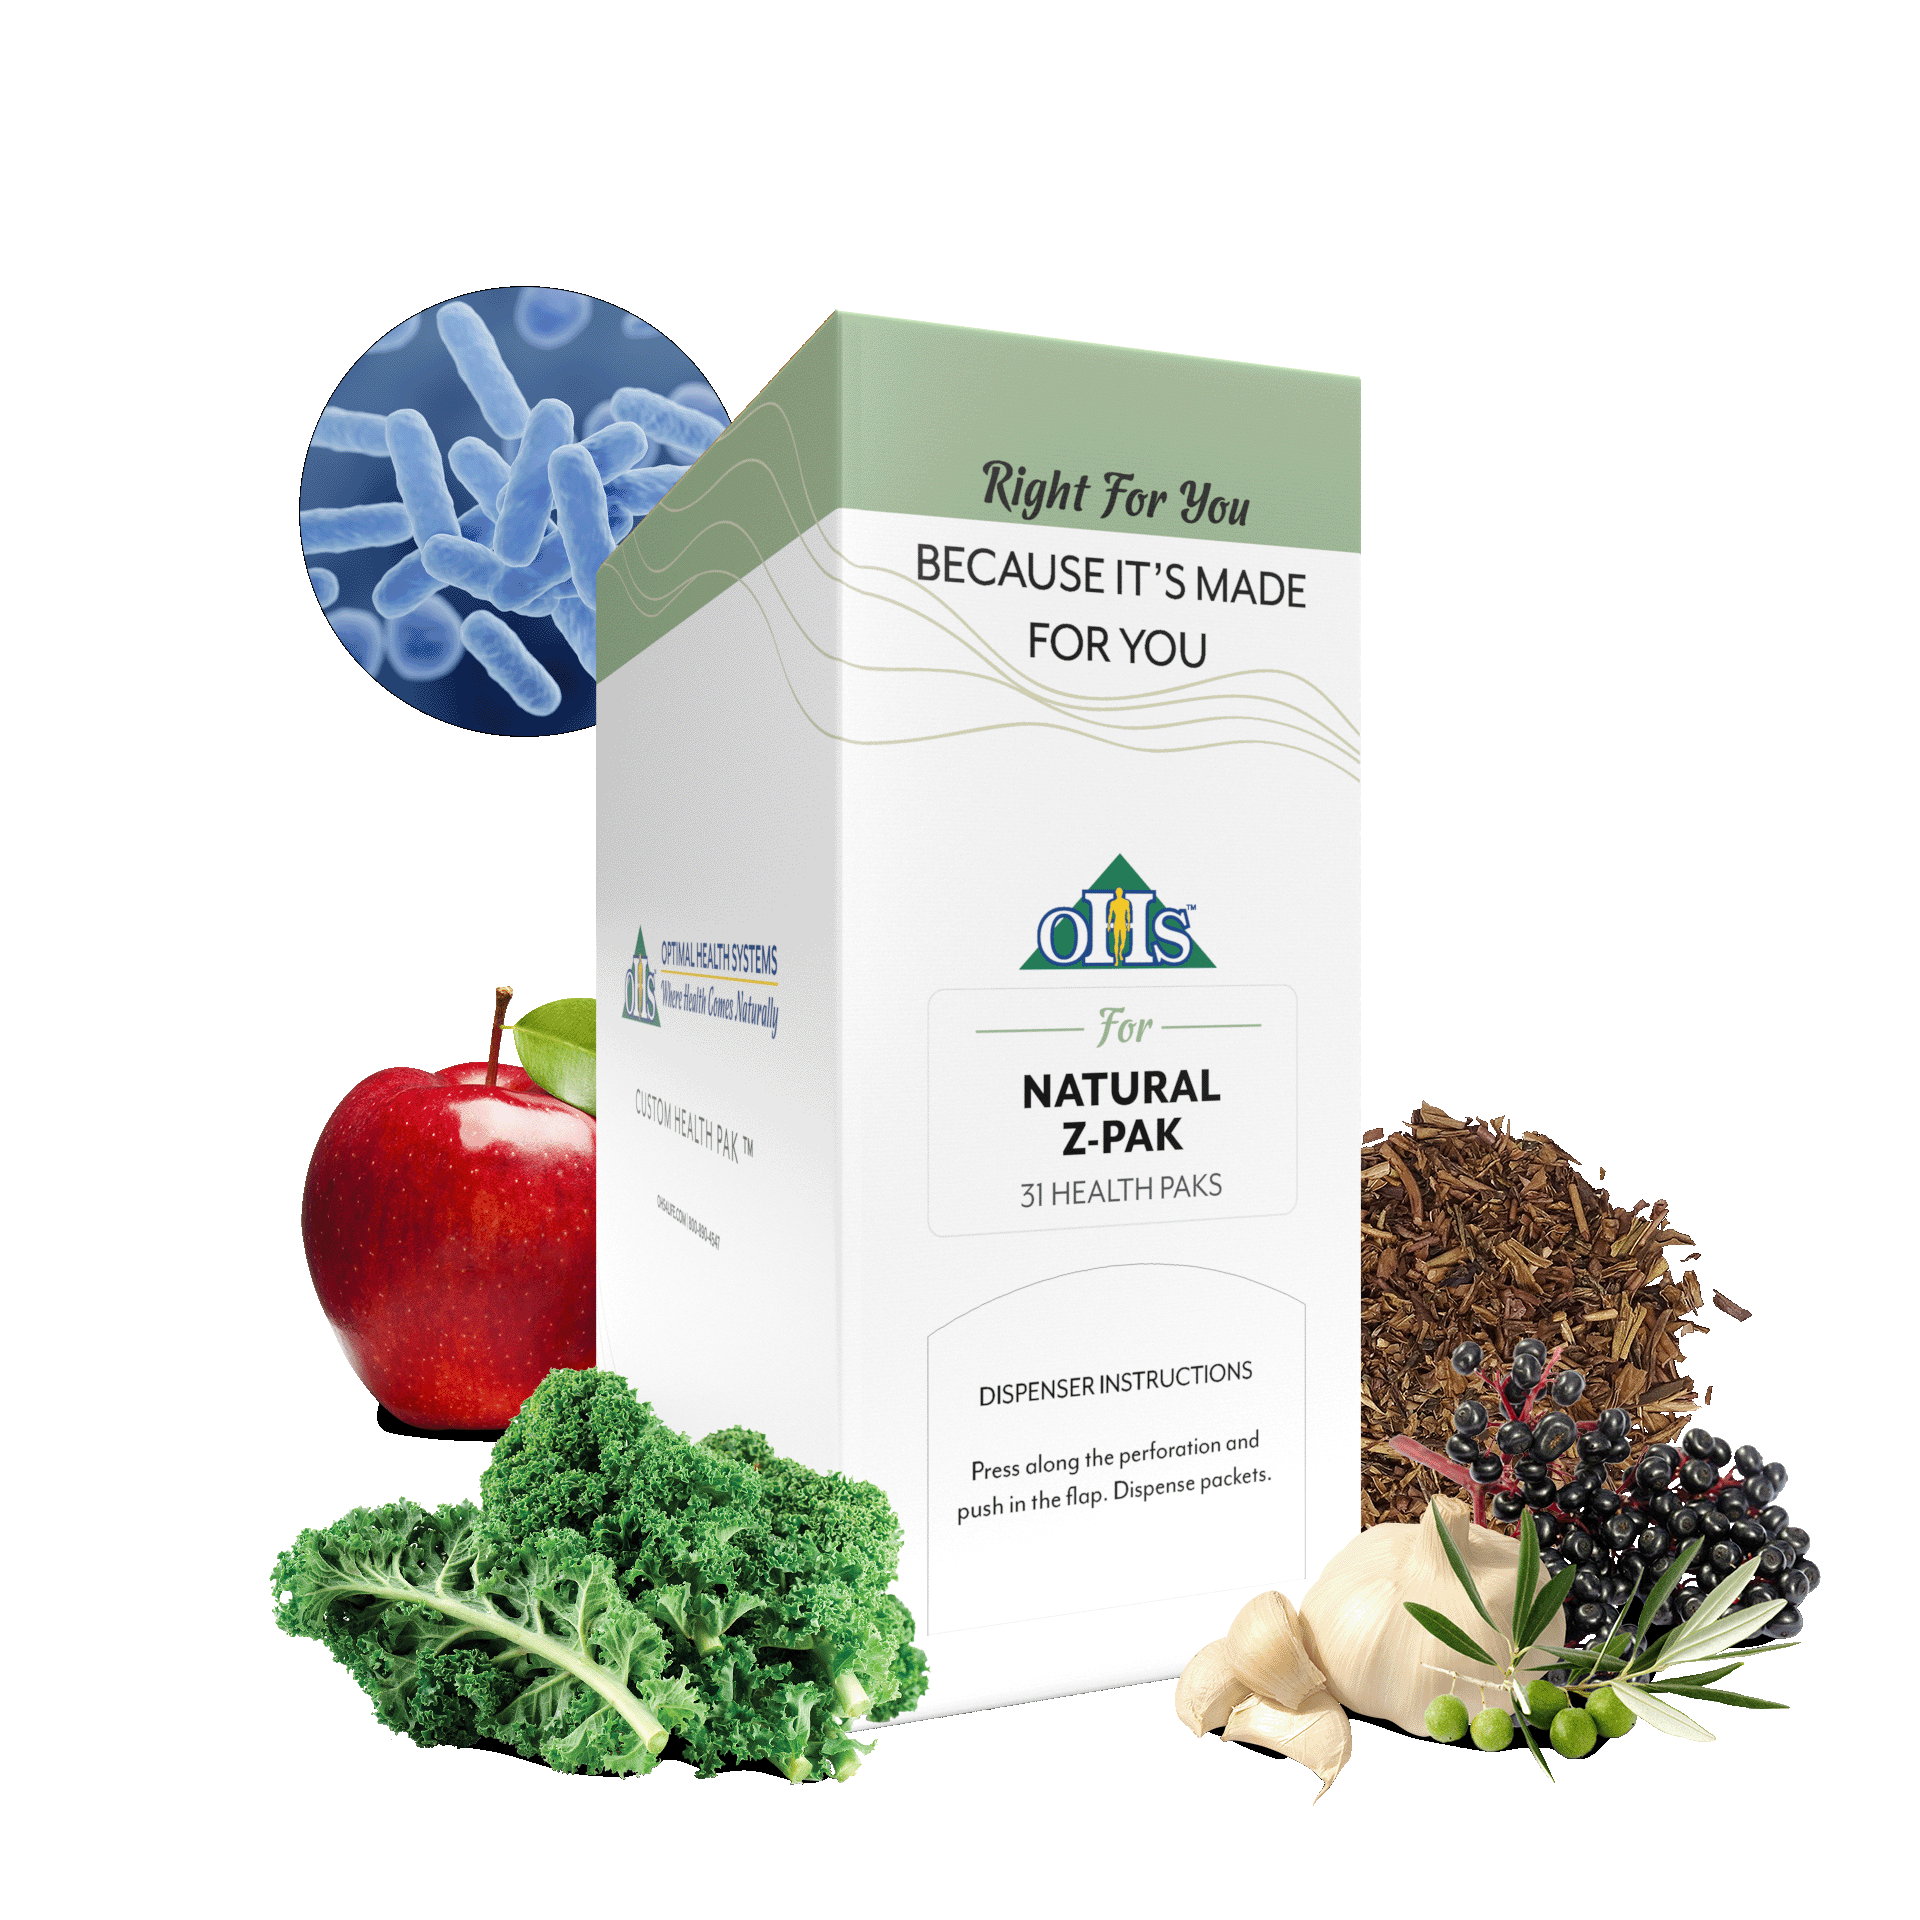 Image of an Optimal Natural Z Pak. Around the pak are green tea, elderberries, garlic, olive branch, and apple. Kale, and probiotics.